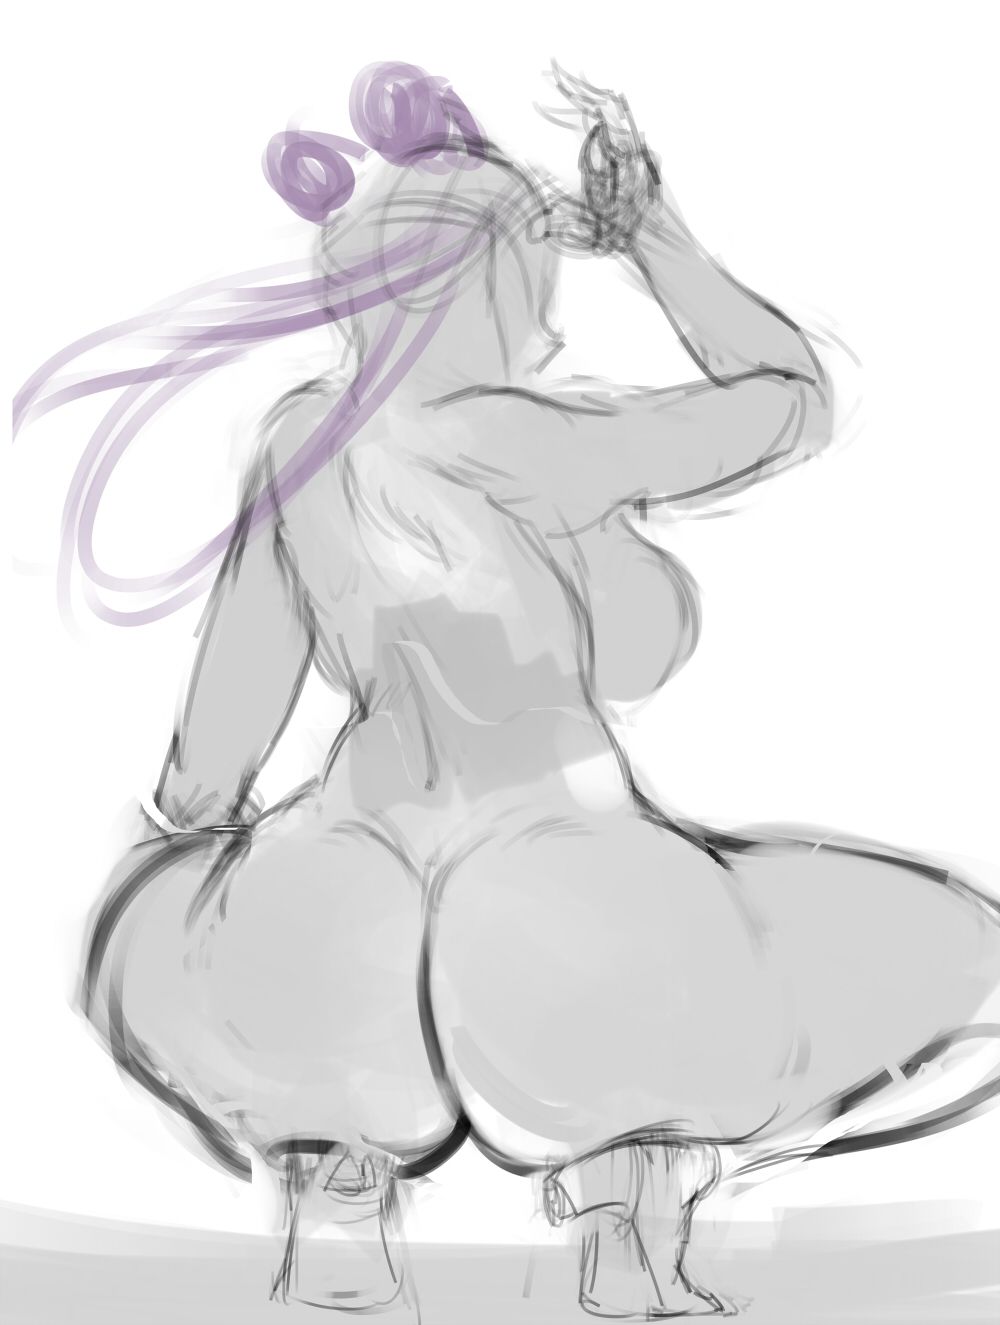 Artist - cutesexyrobutts (up to 16/02/19) 203